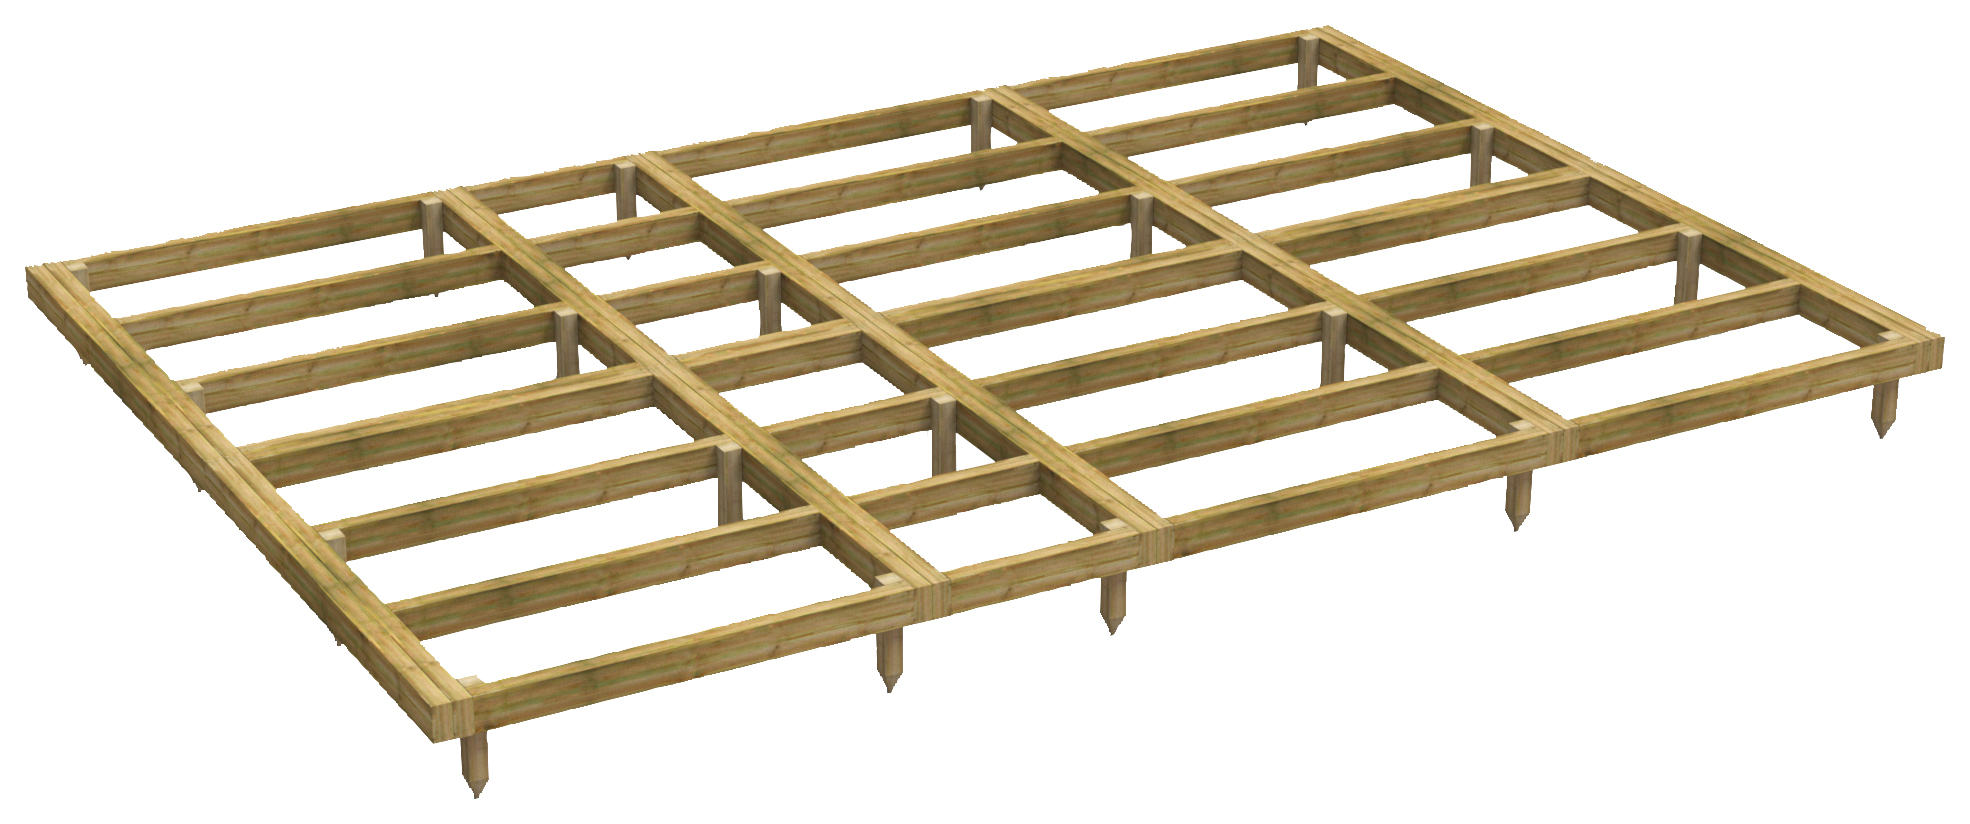 Image of Power Sheds 14 x 10ft Pressure Treated Garden Building Base Kit